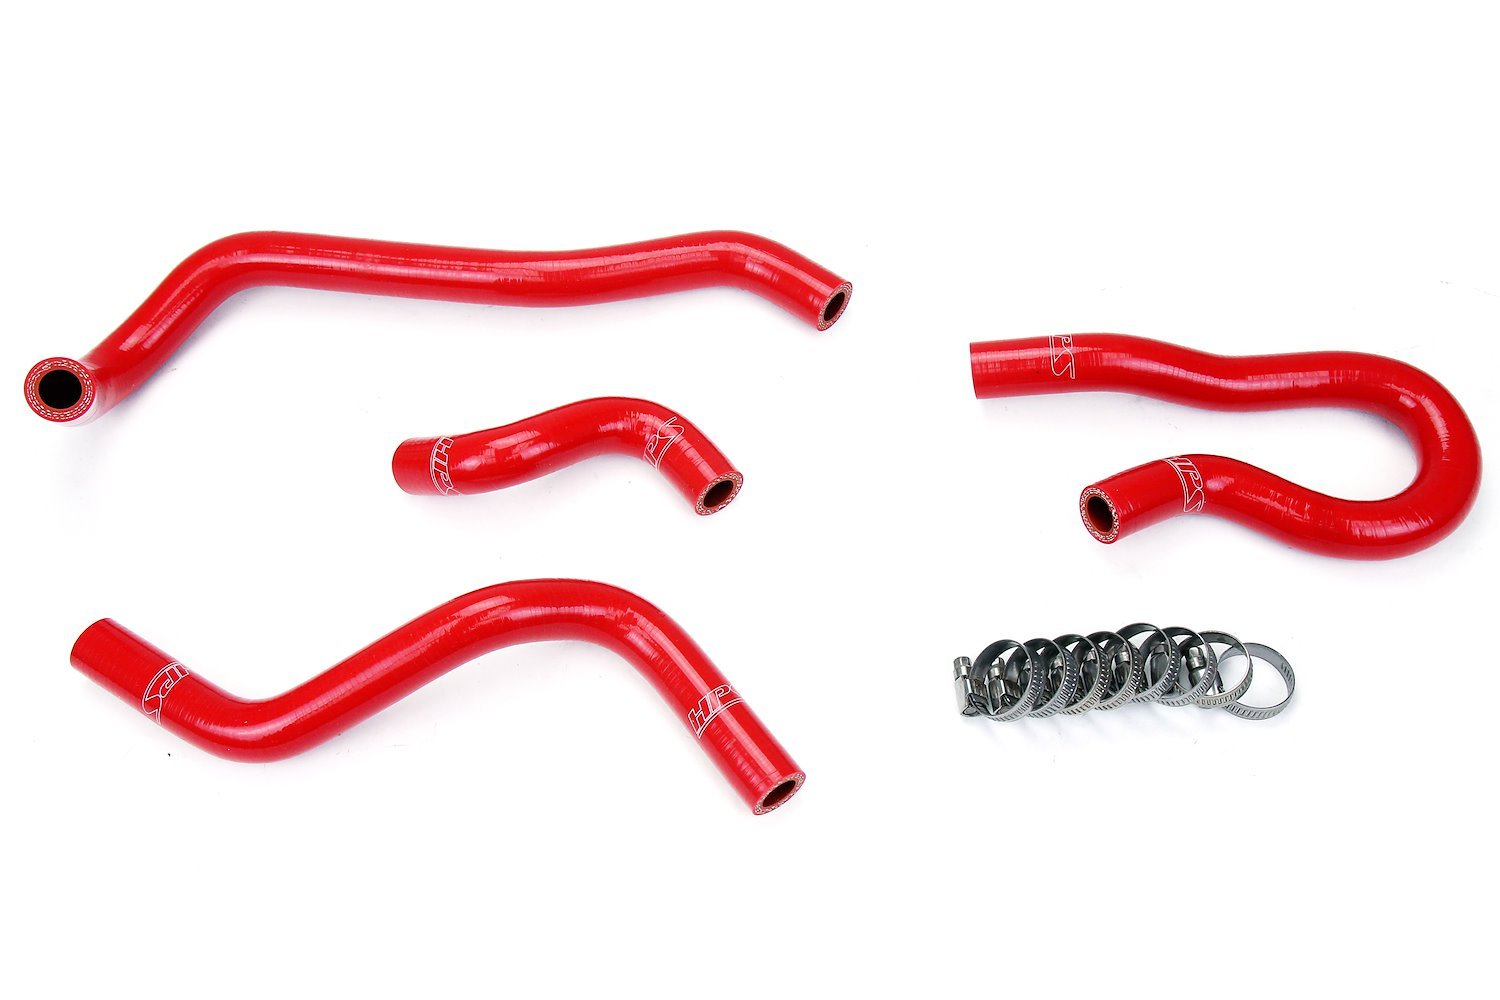 57-1775-RED Heater Hose Kit, 3-Ply Reinforced Silicone, Replaces Rubber Heater Coolant & Water Bypass Hoses